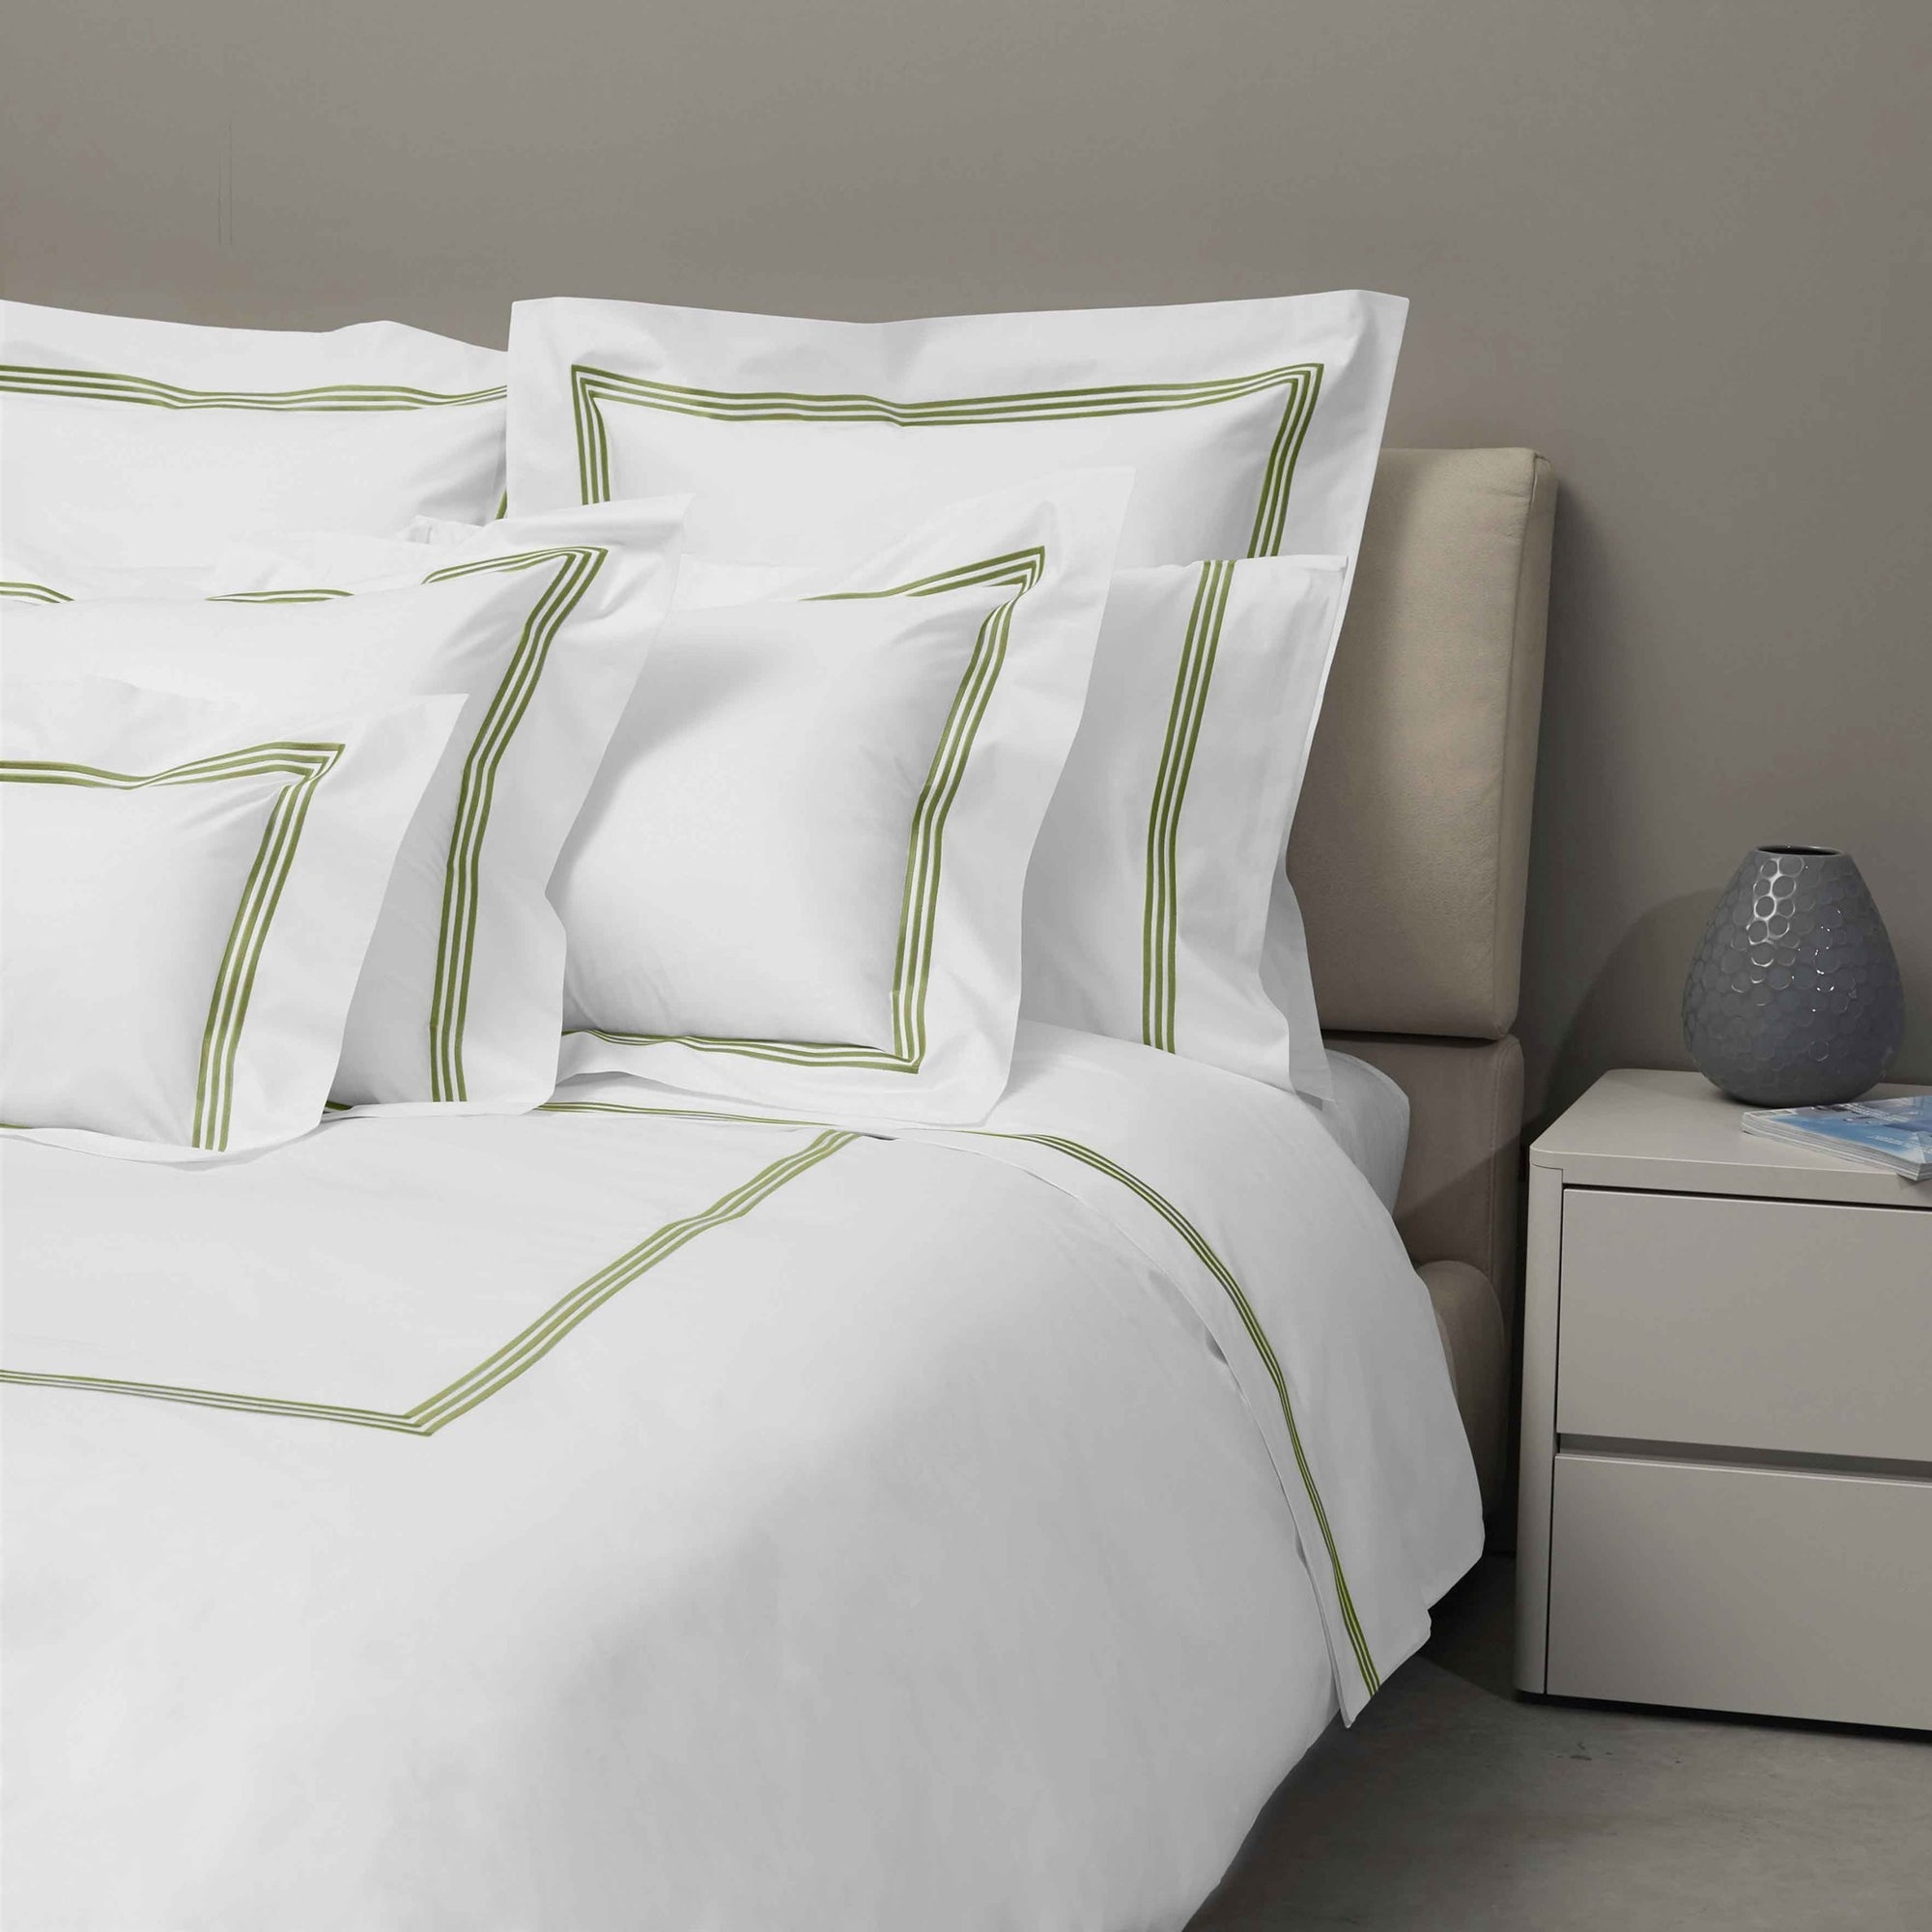 Bed Dressed in Signoria Platinum Percale Bedding in White/Moss Green Color